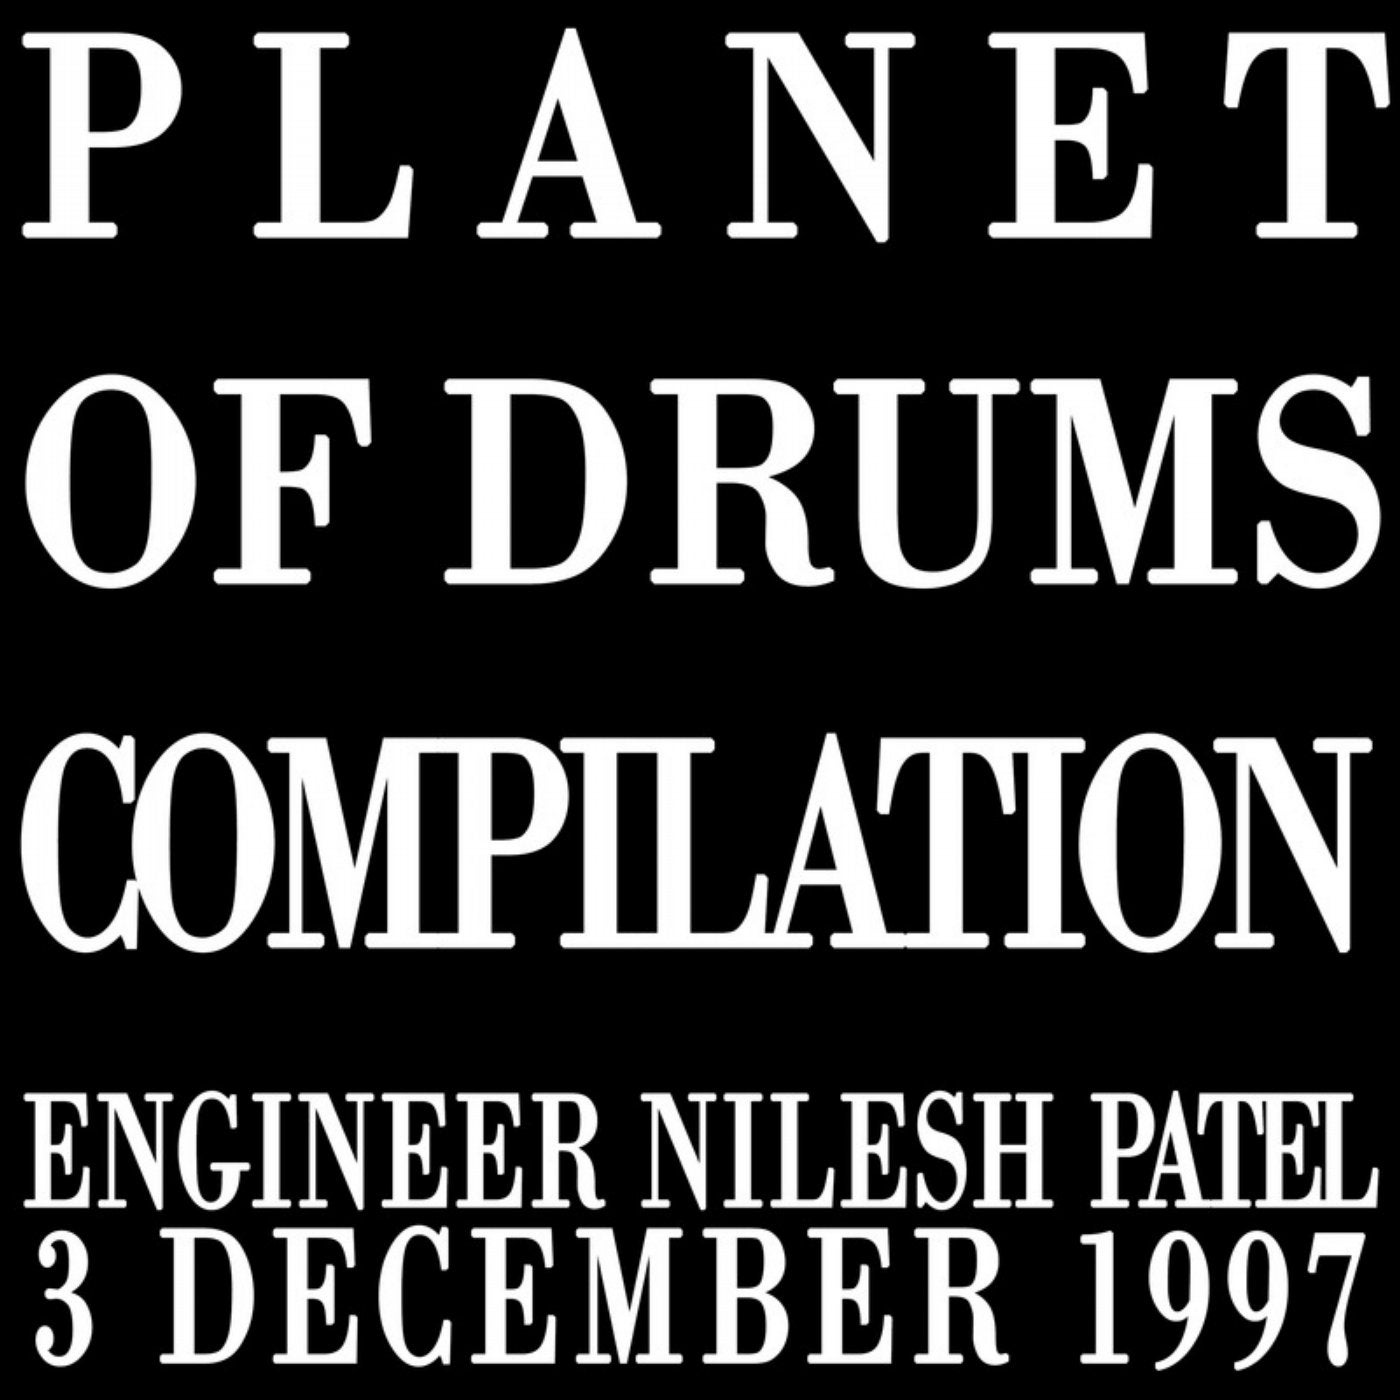 Planet Of Drums Compilation